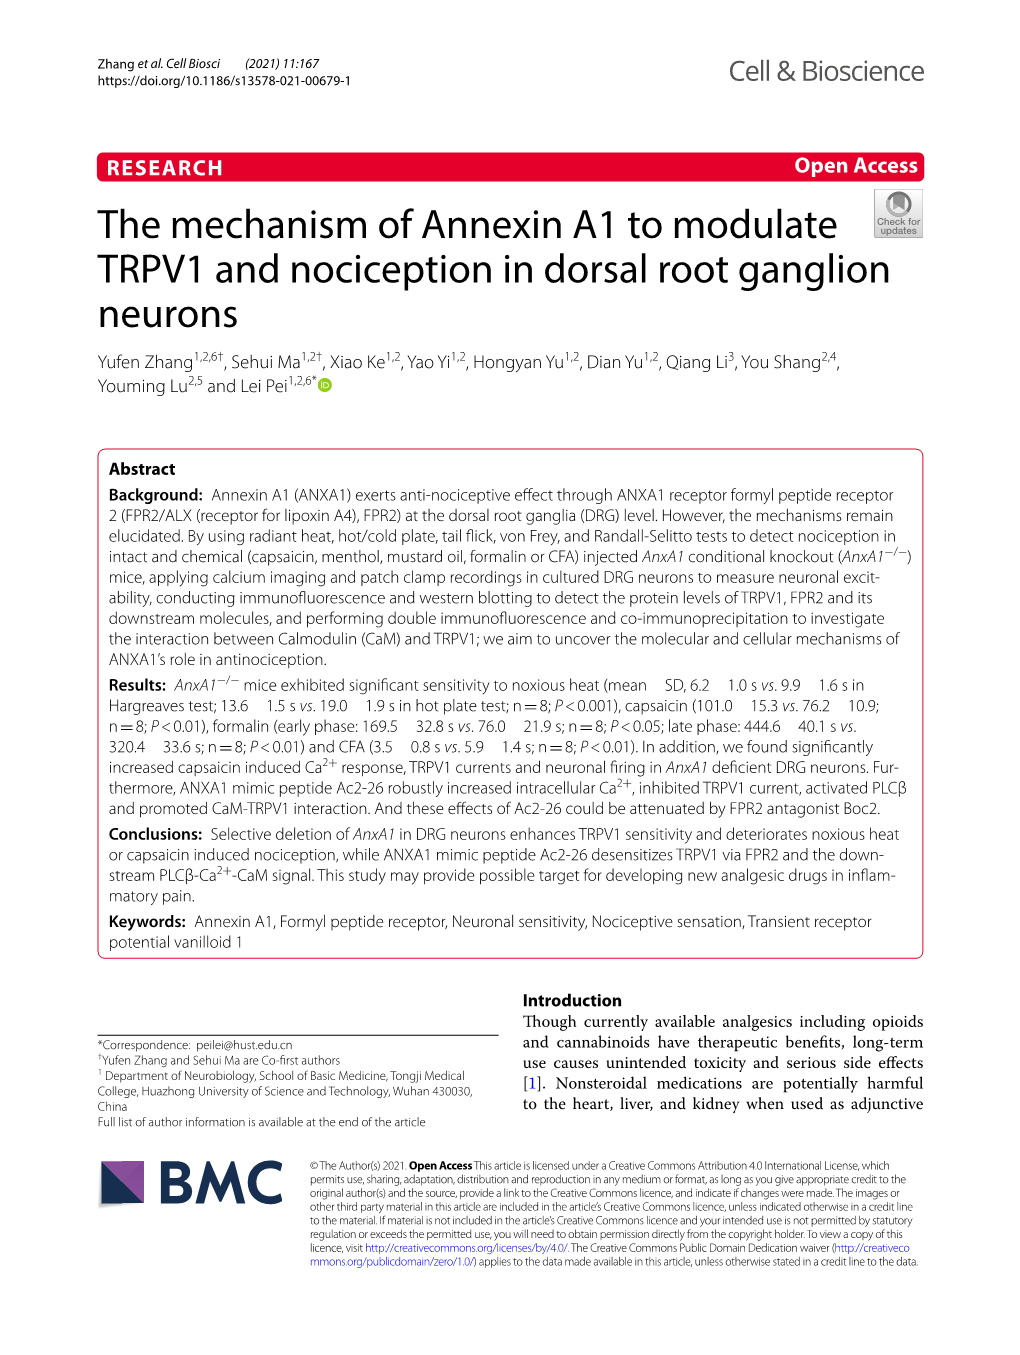 The Mechanism of Annexin A1 to Modulate TRPV1 and Nociception